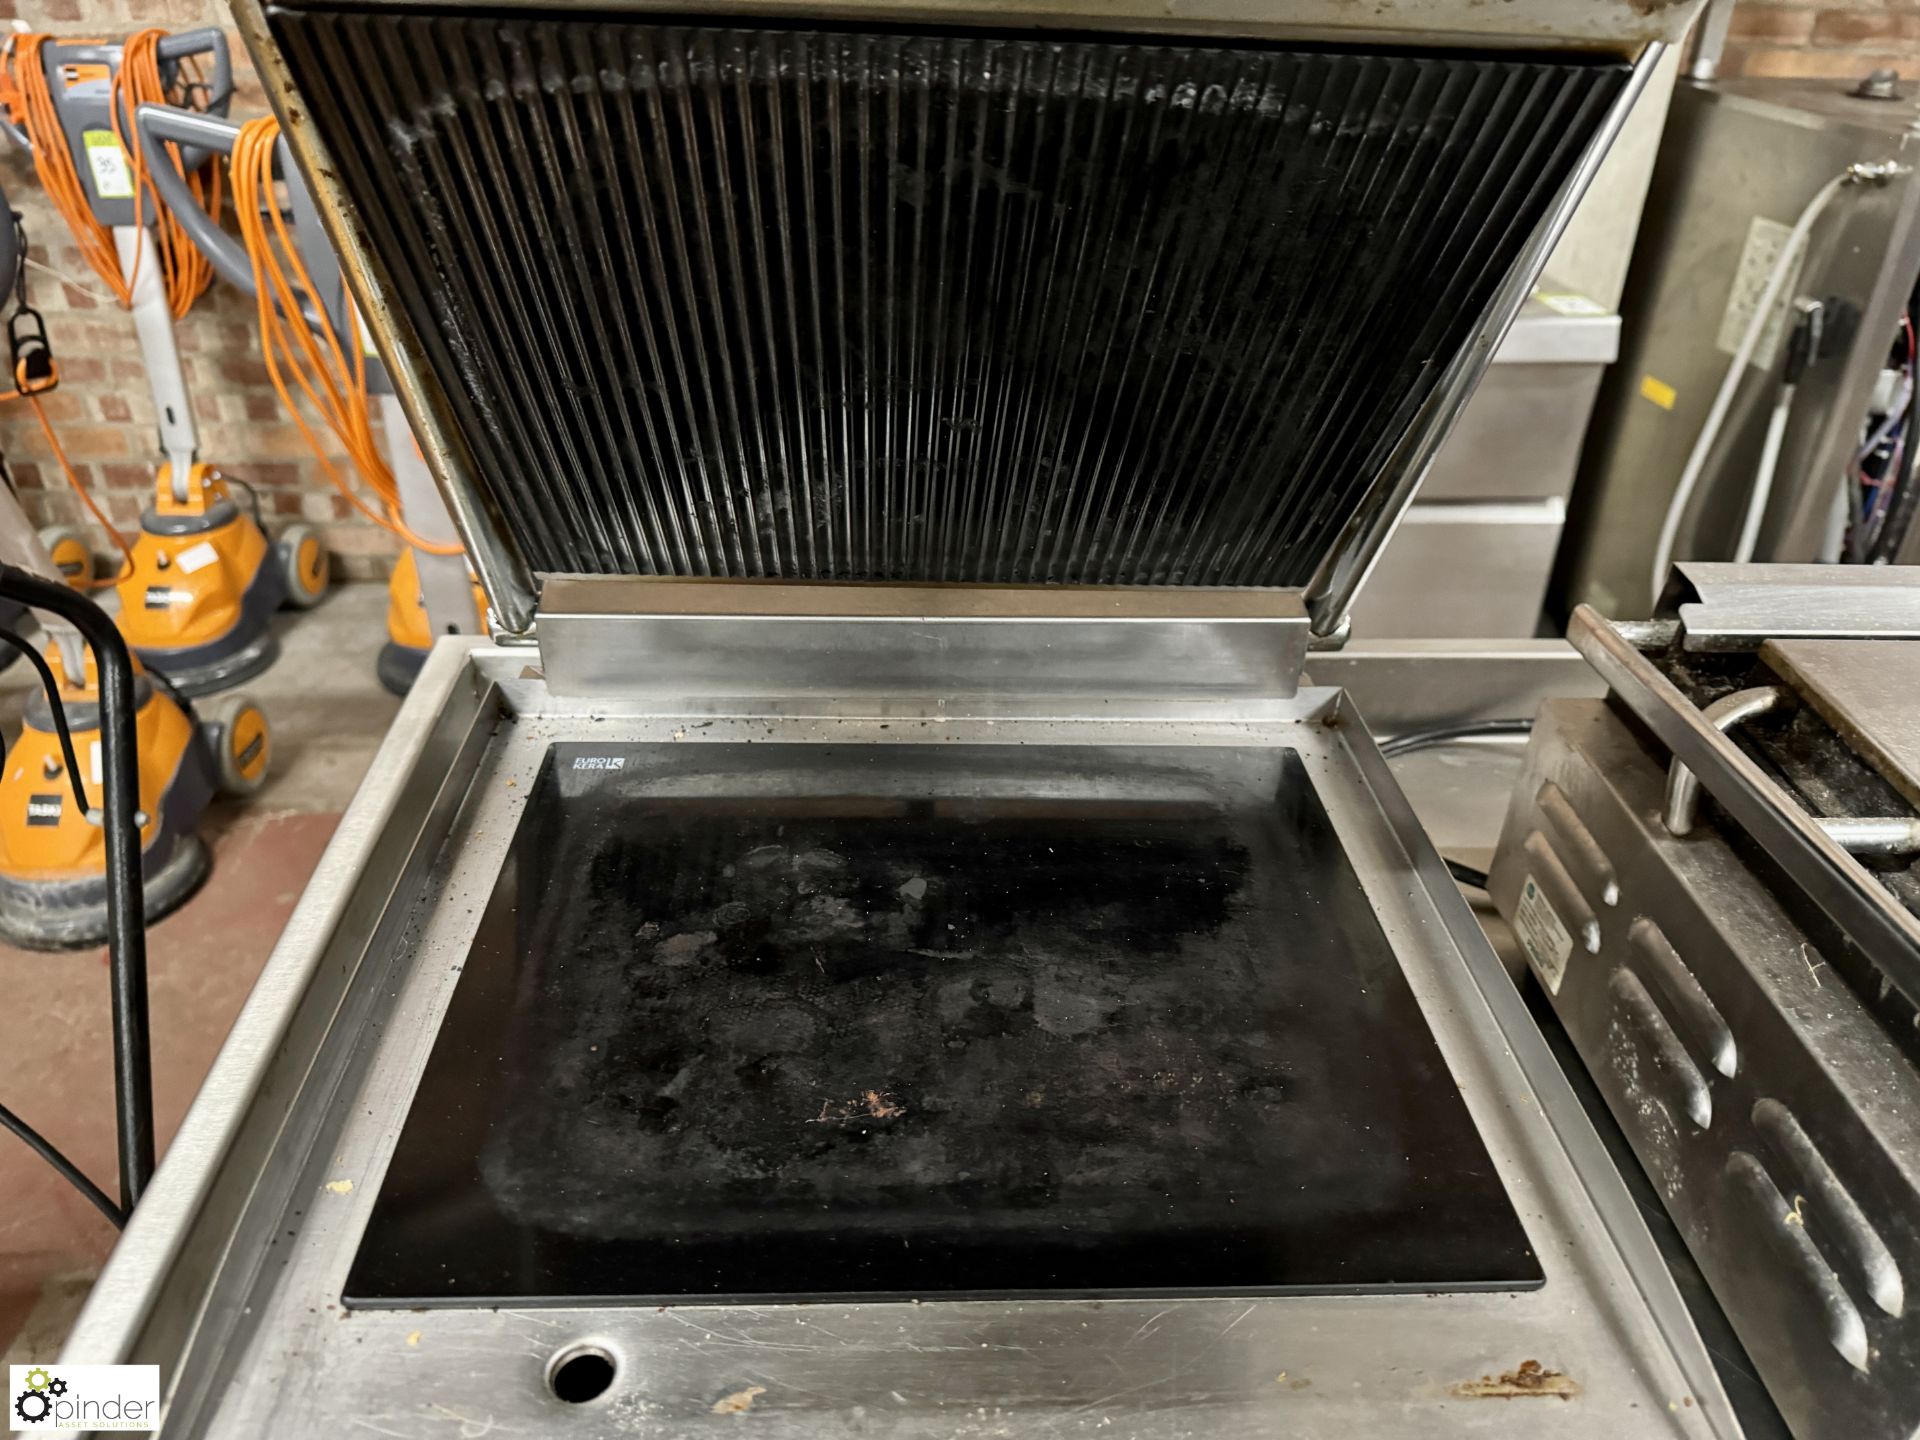 Roller Grill VCL-M Panini Press, 240volts - Image 4 of 6